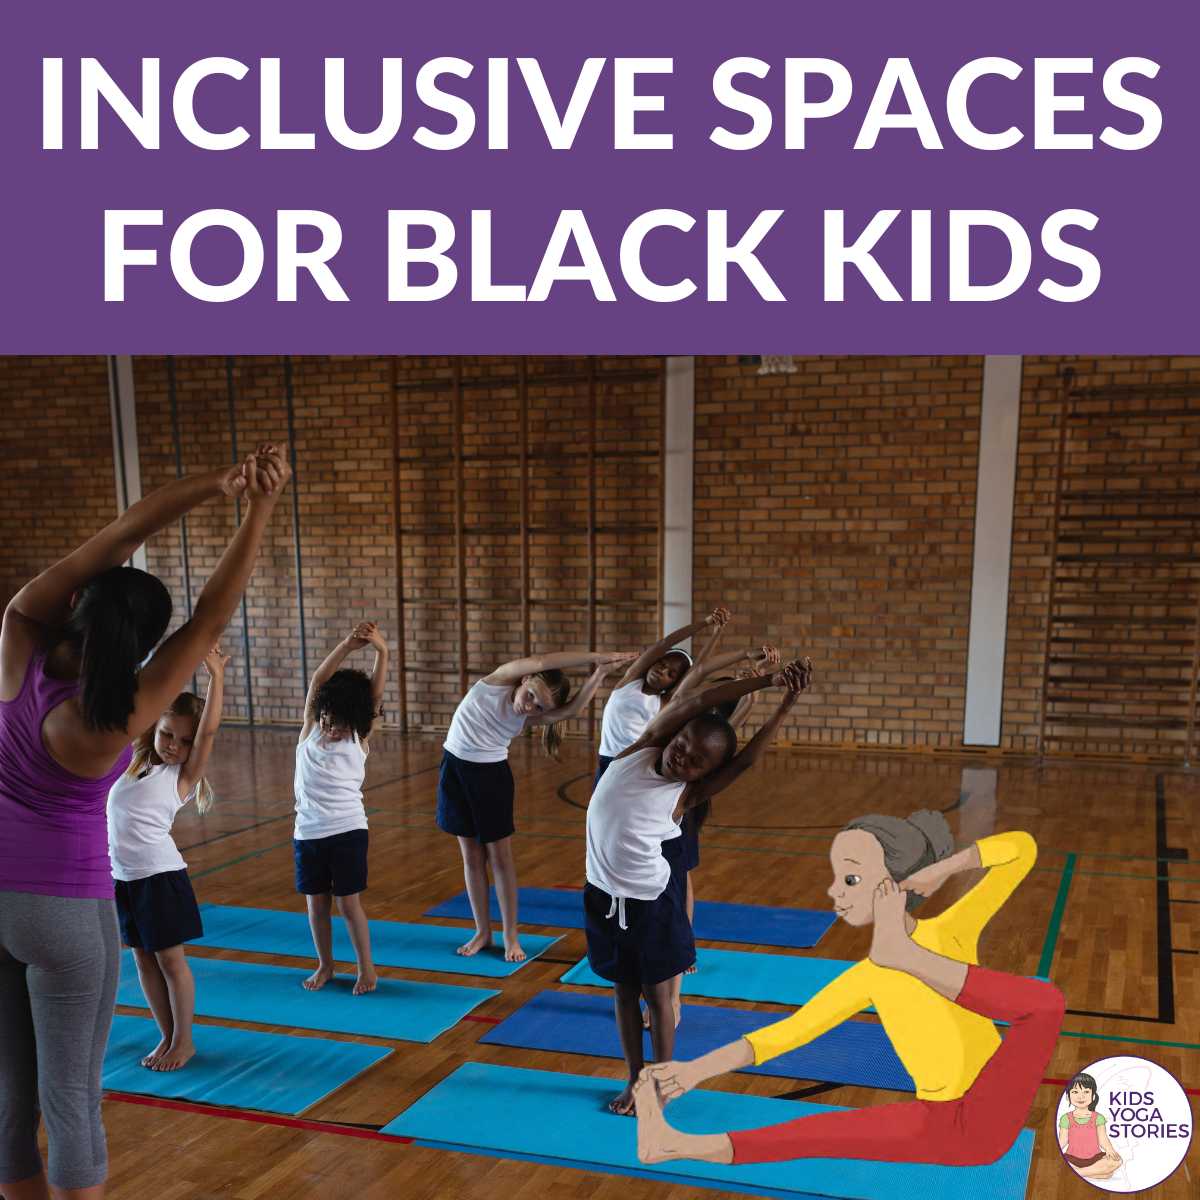 Inclusive spaces for black kids in yoga | Kids Yoga Stories